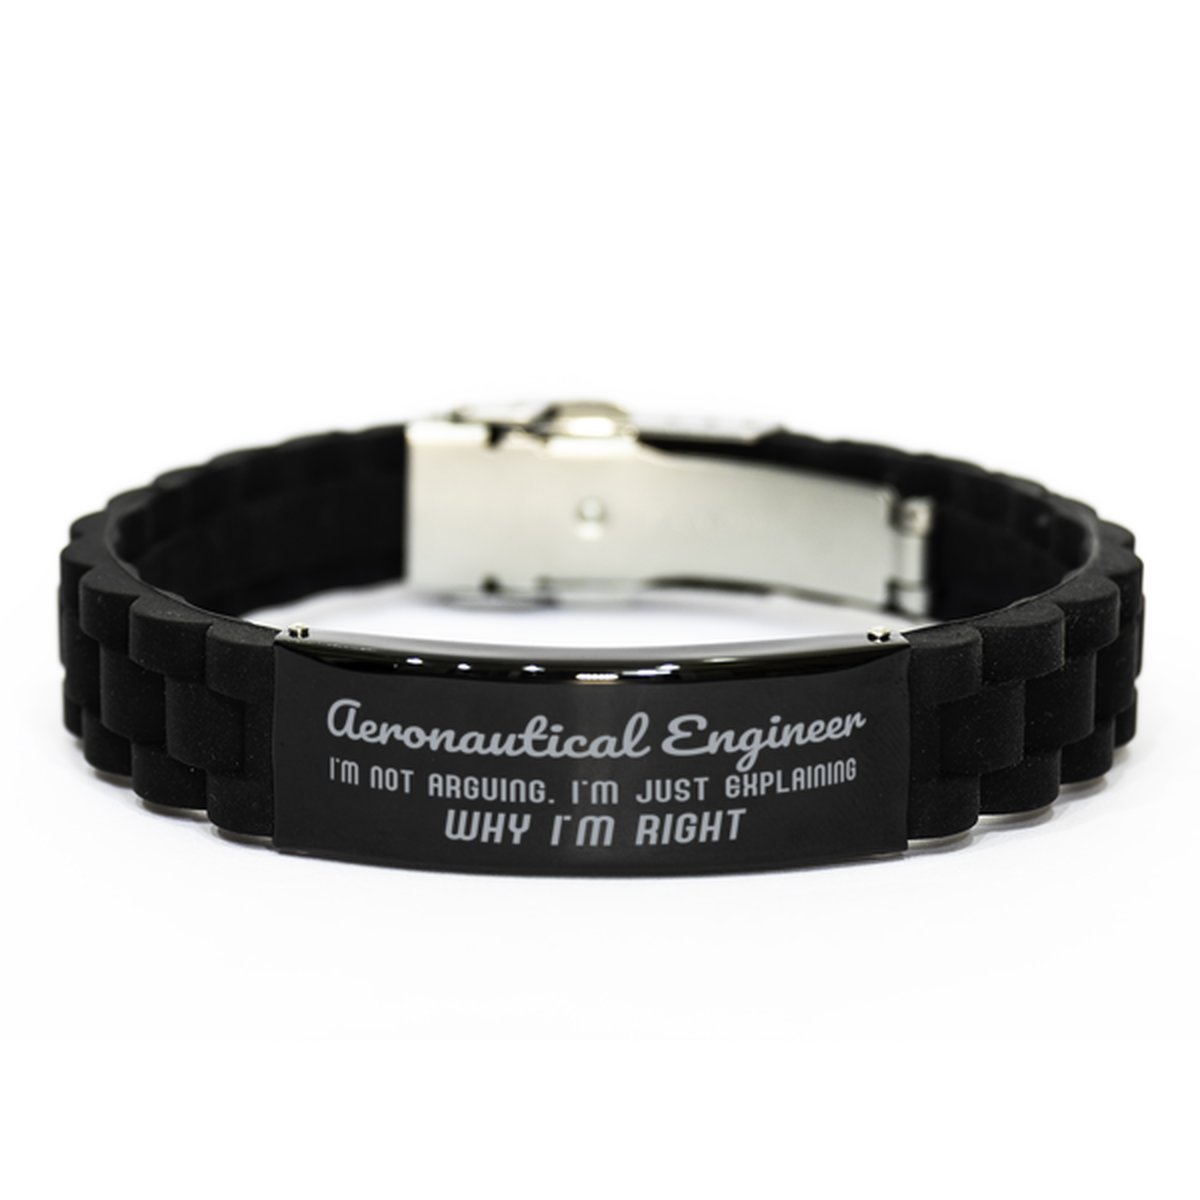 Aeronautical Engineer I'm not Arguing. I'm Just Explaining Why I'm RIGHT Black Glidelock Clasp Bracelet, Funny Saying Quote Aeronautical Engineer Gifts For Aeronautical Engineer Graduation Birthday Christmas Gifts for Men Women Coworker